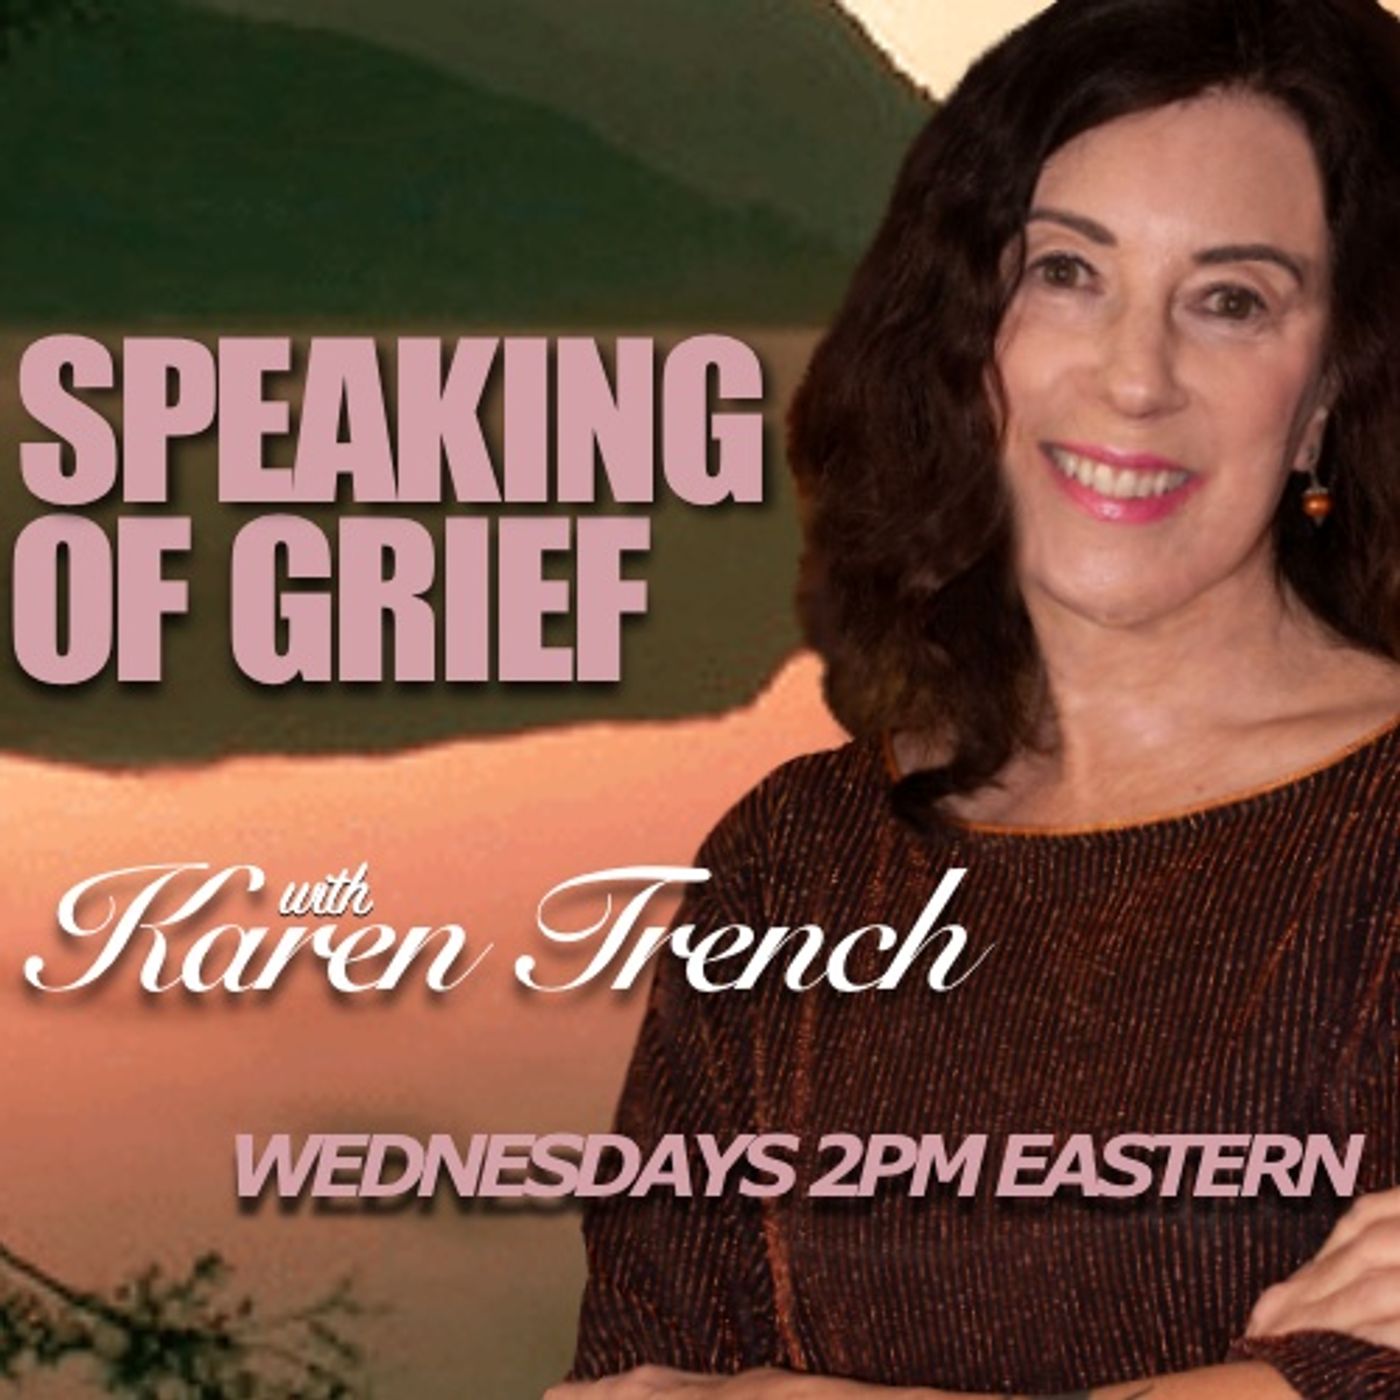 Personal Insights on Forgiveness of Self and Others as it Relates to Grief and Loss.